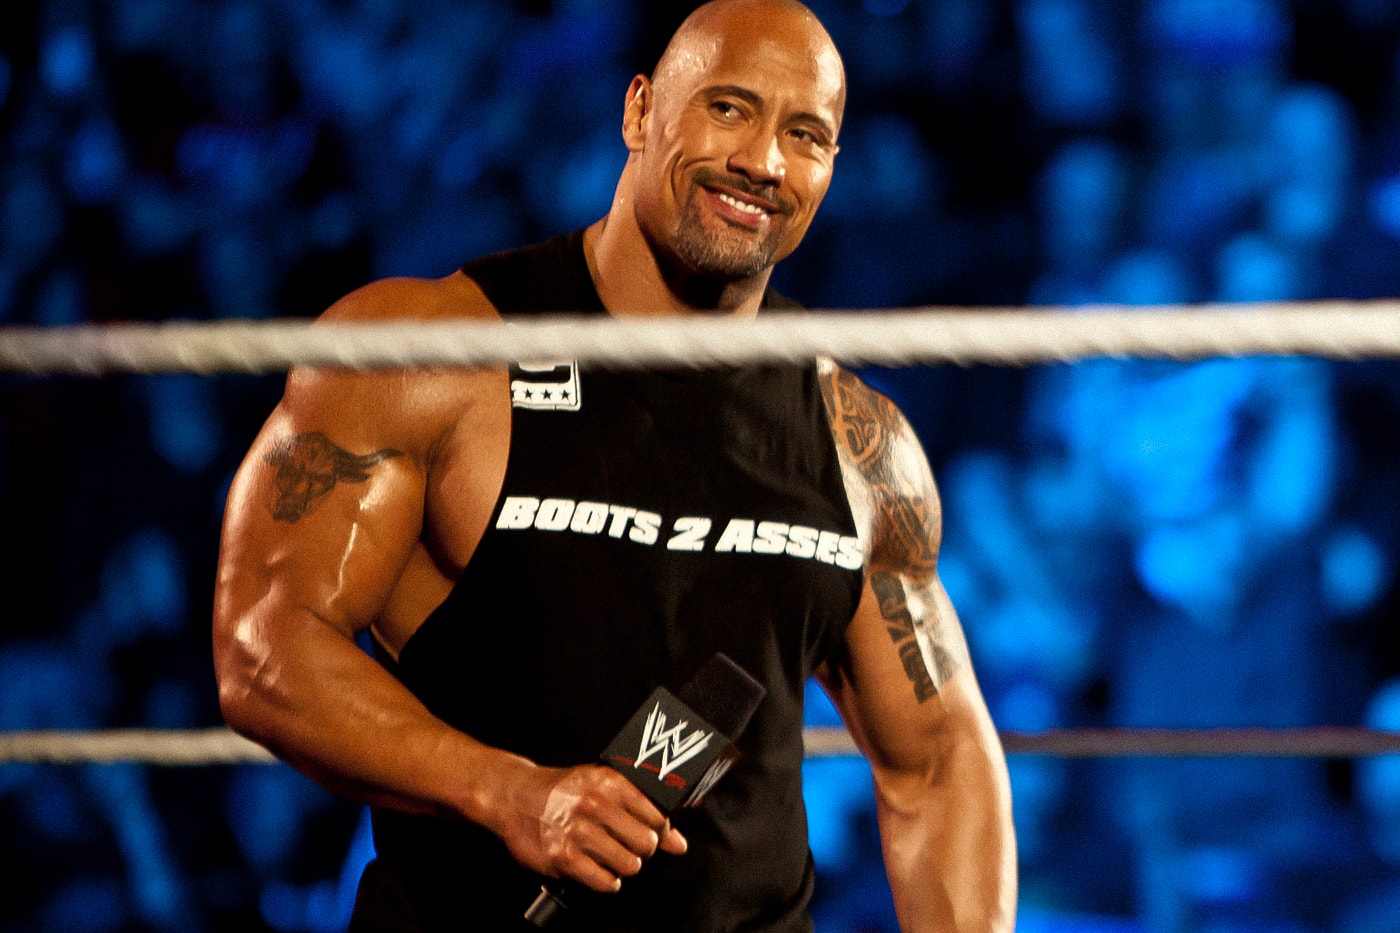 The Rock Comments On One More Possible WWE WrestleMania Match